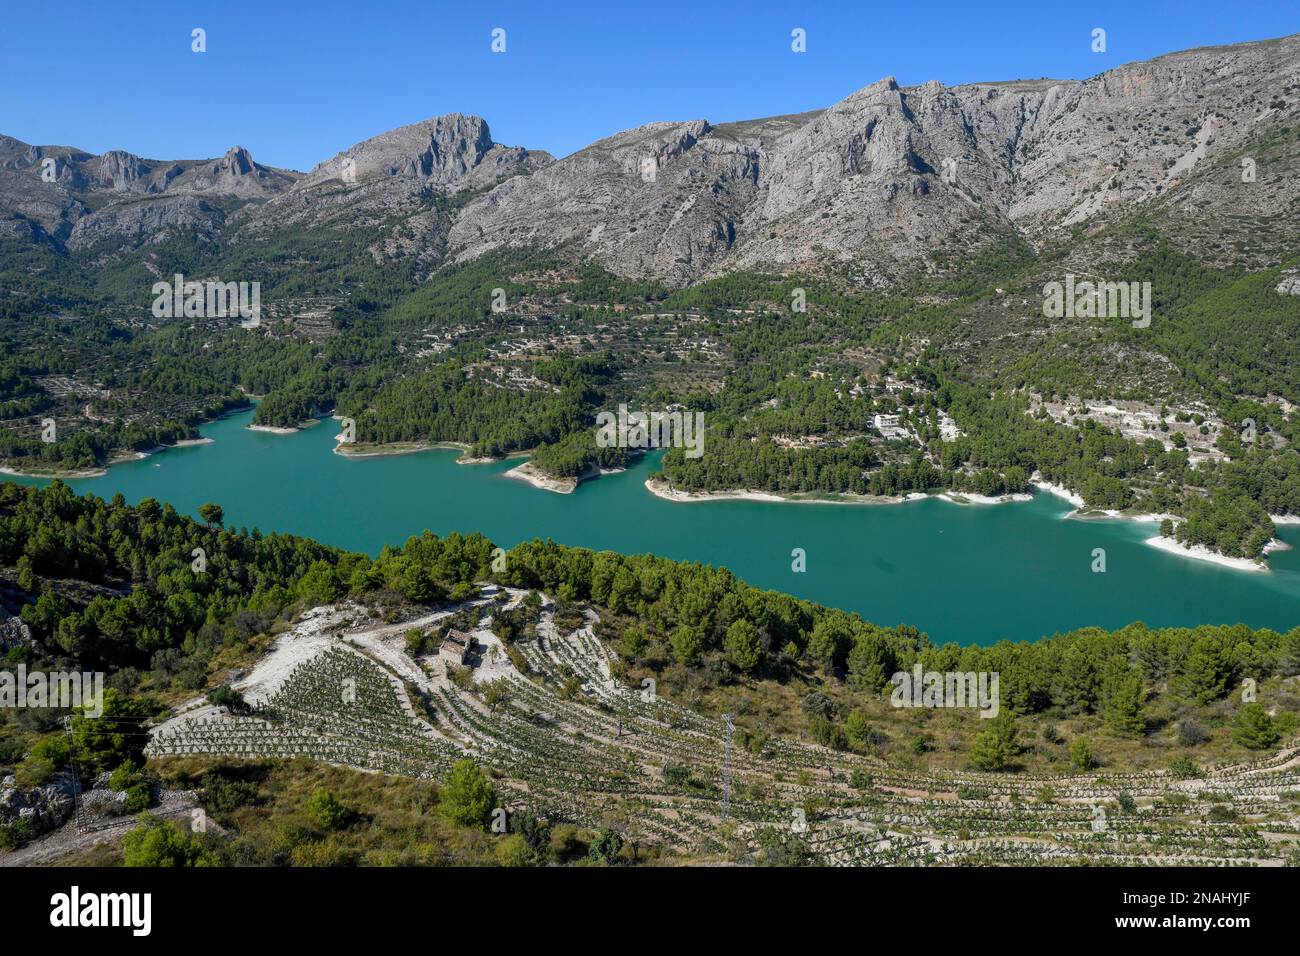 View from Castell de Guadalest to the reservoir, Guadalest, Alicante province, Costa Blanca, Spain Stock Photo